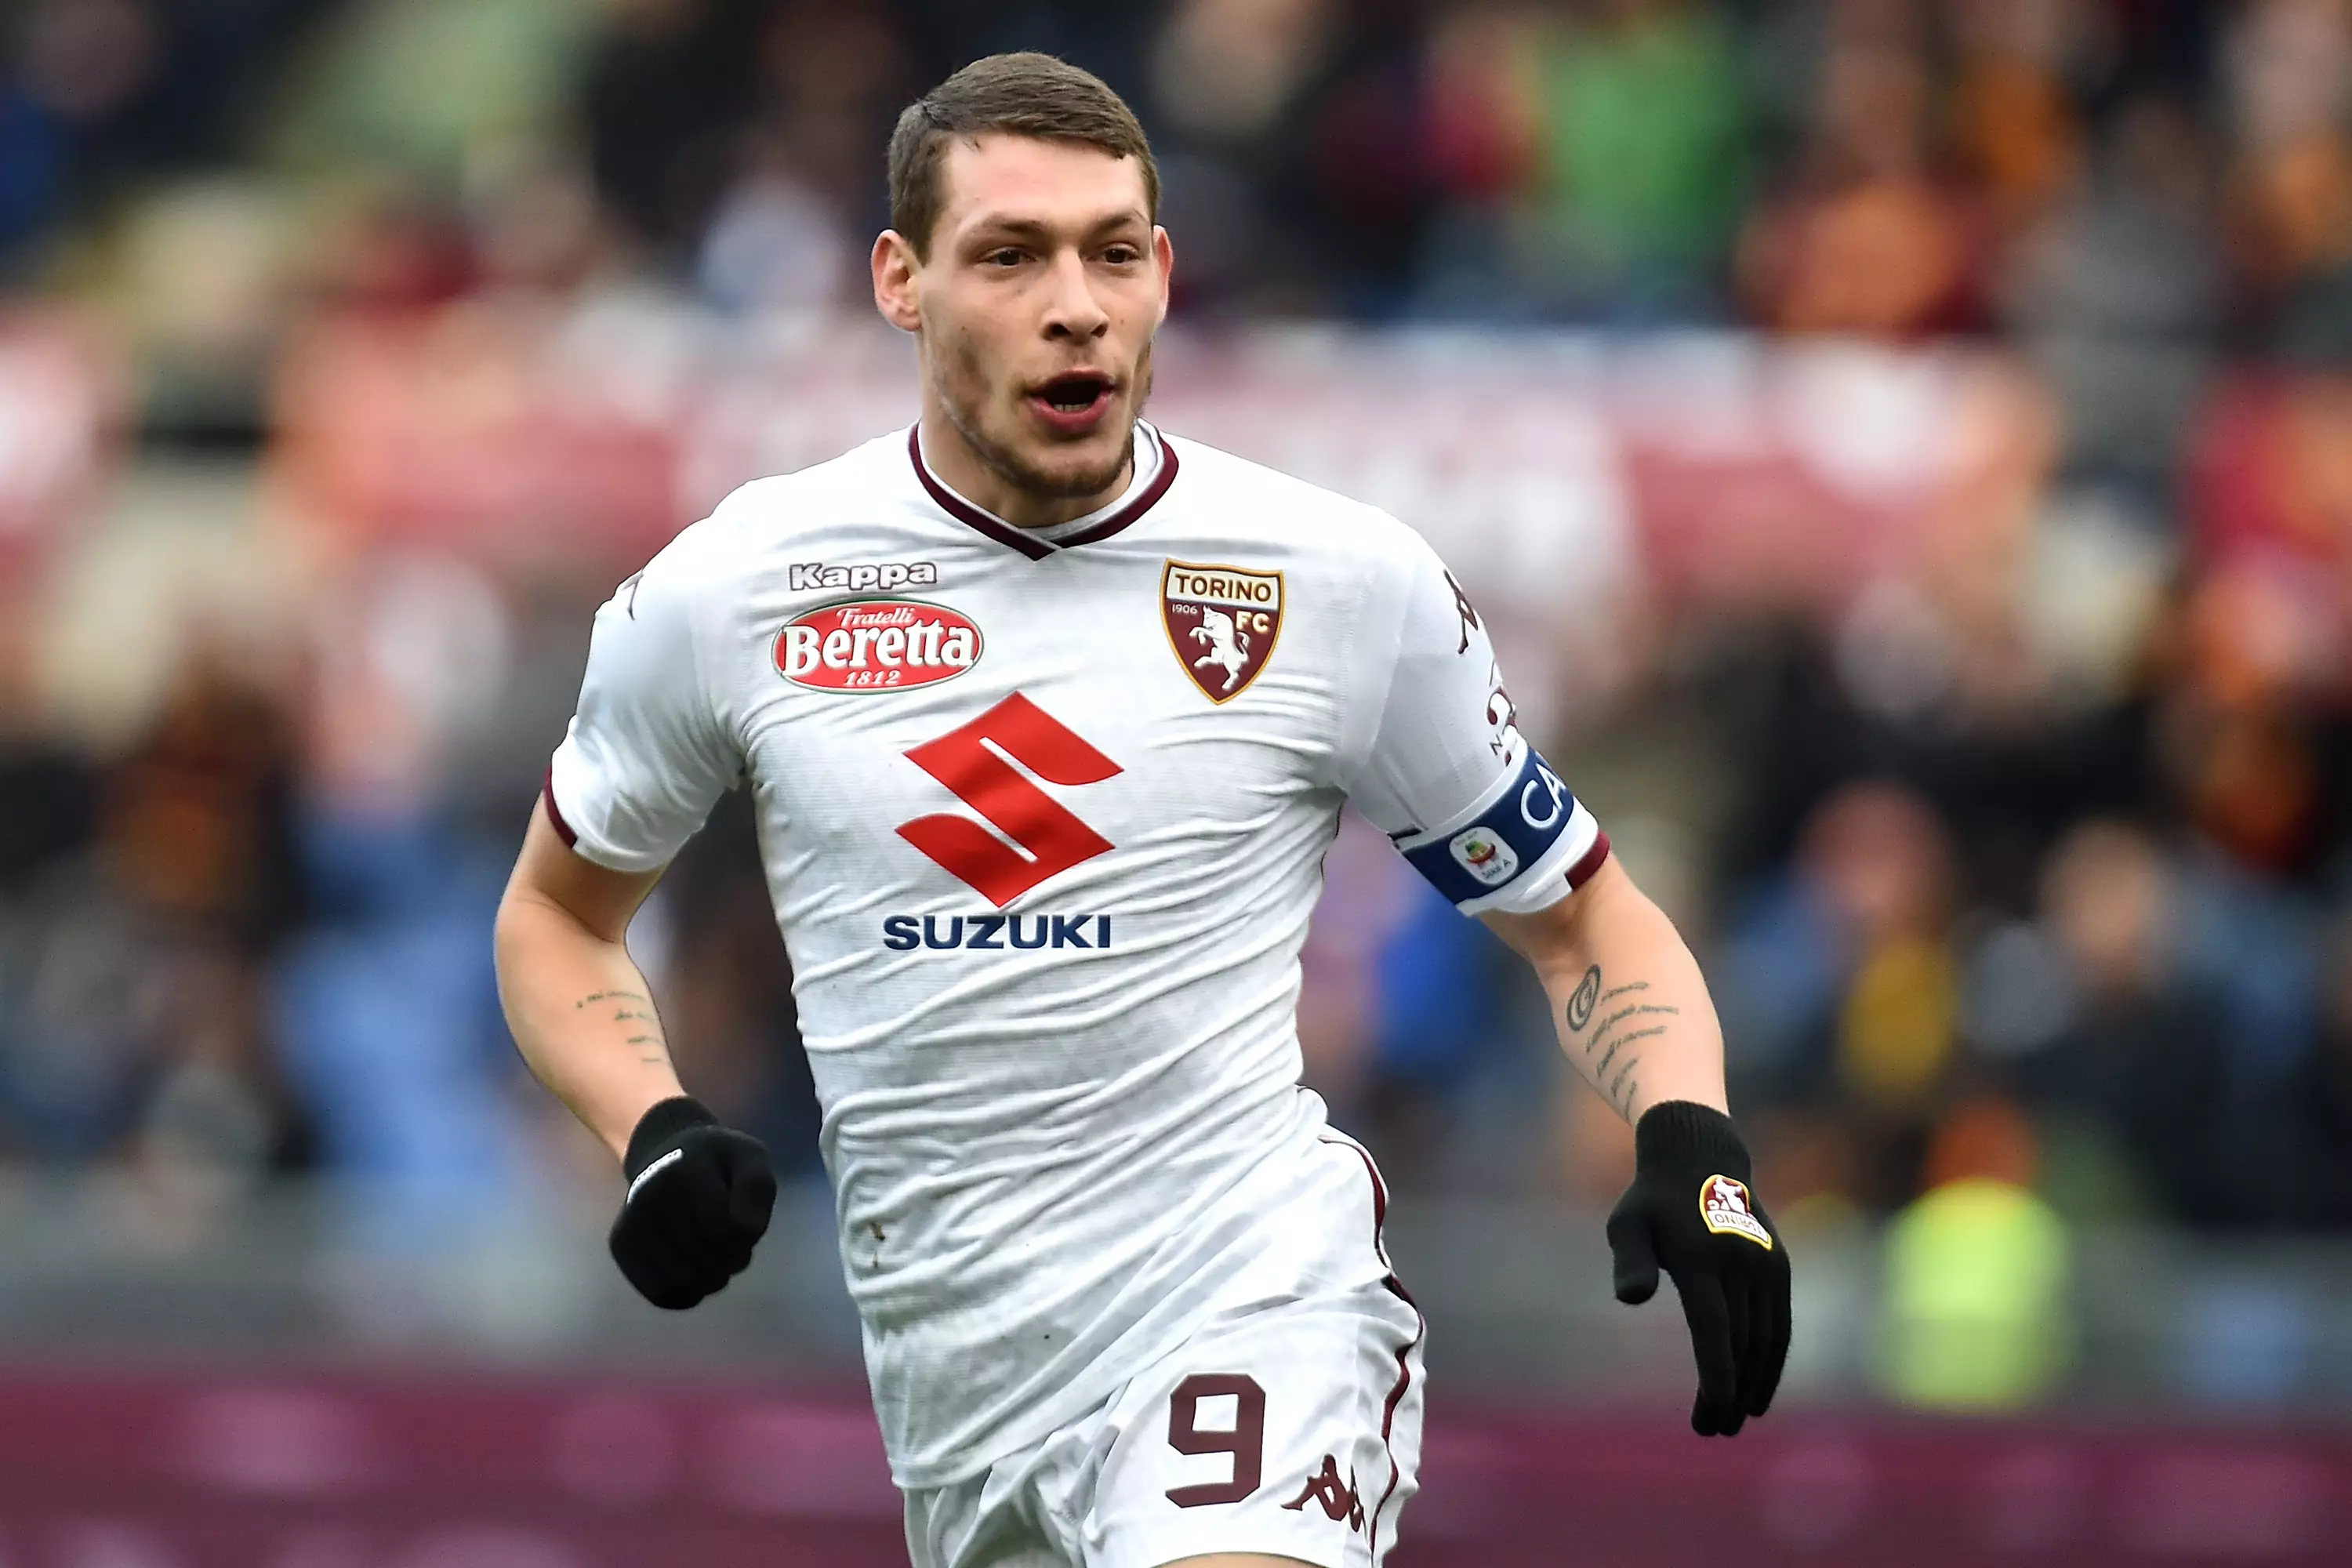 Could Belotti head to West Ham? Image: PA Images